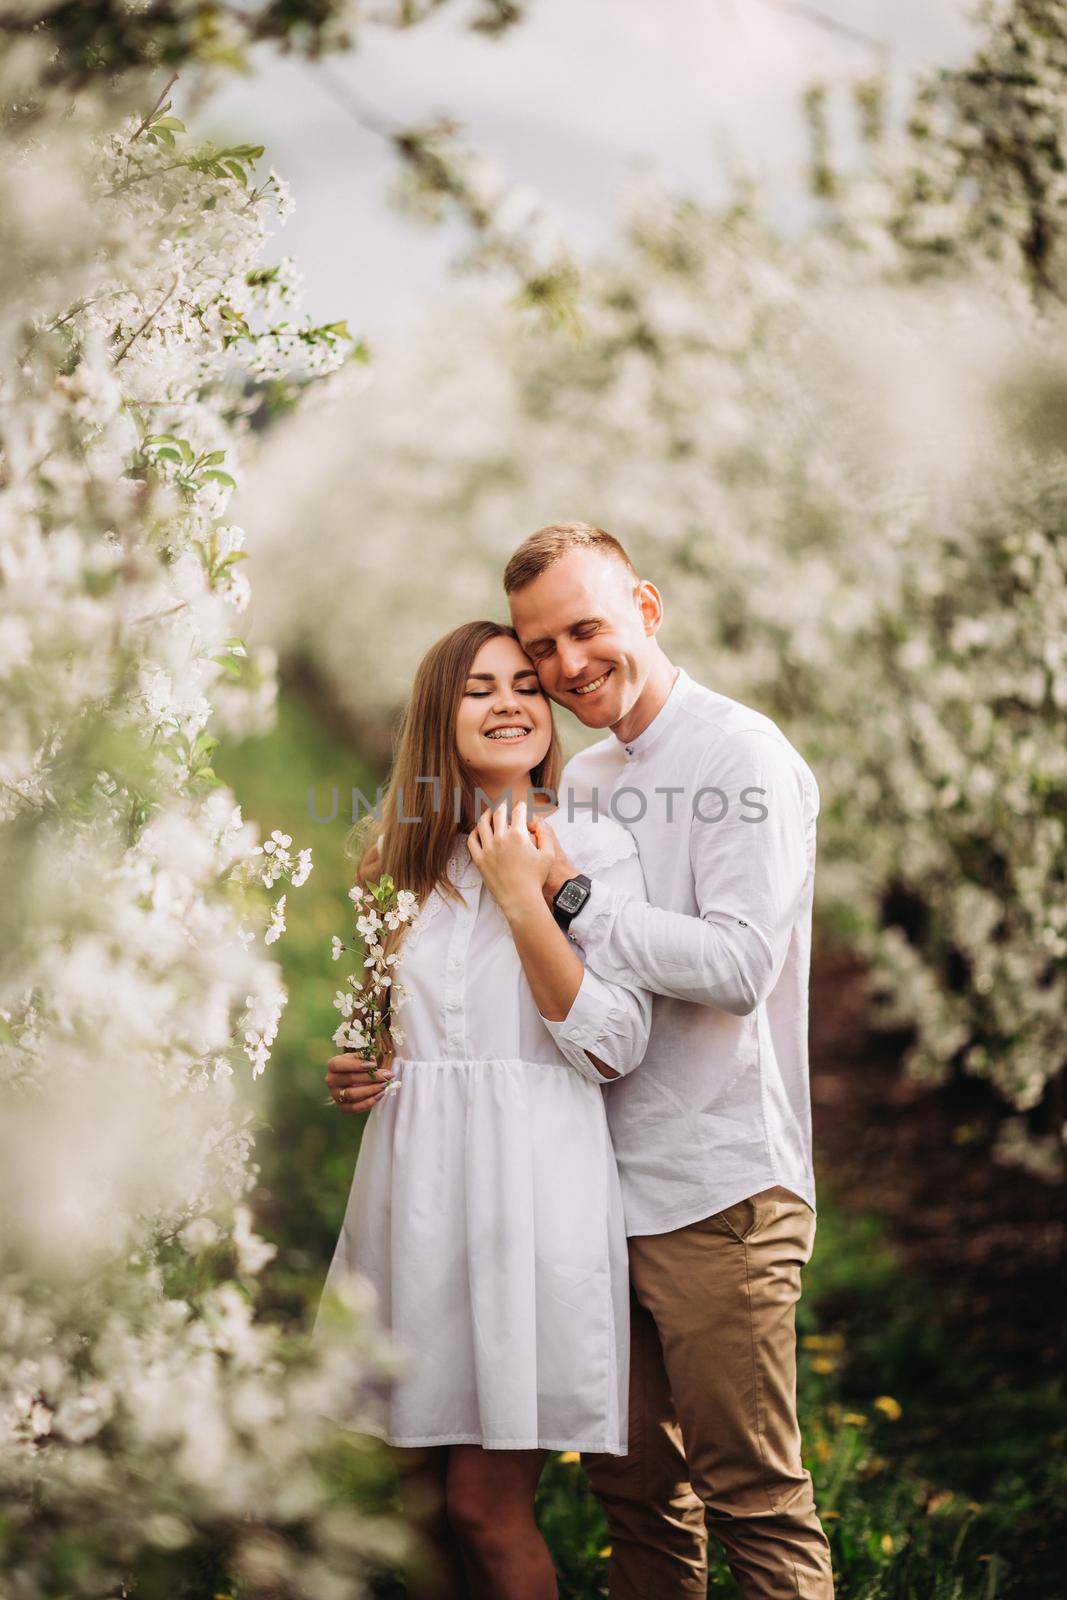 A happy young couple in love stands in a garden of blooming apple trees. A man in a white shirt and a girl in a white light dress are walking in a flowering park by Dmitrytph